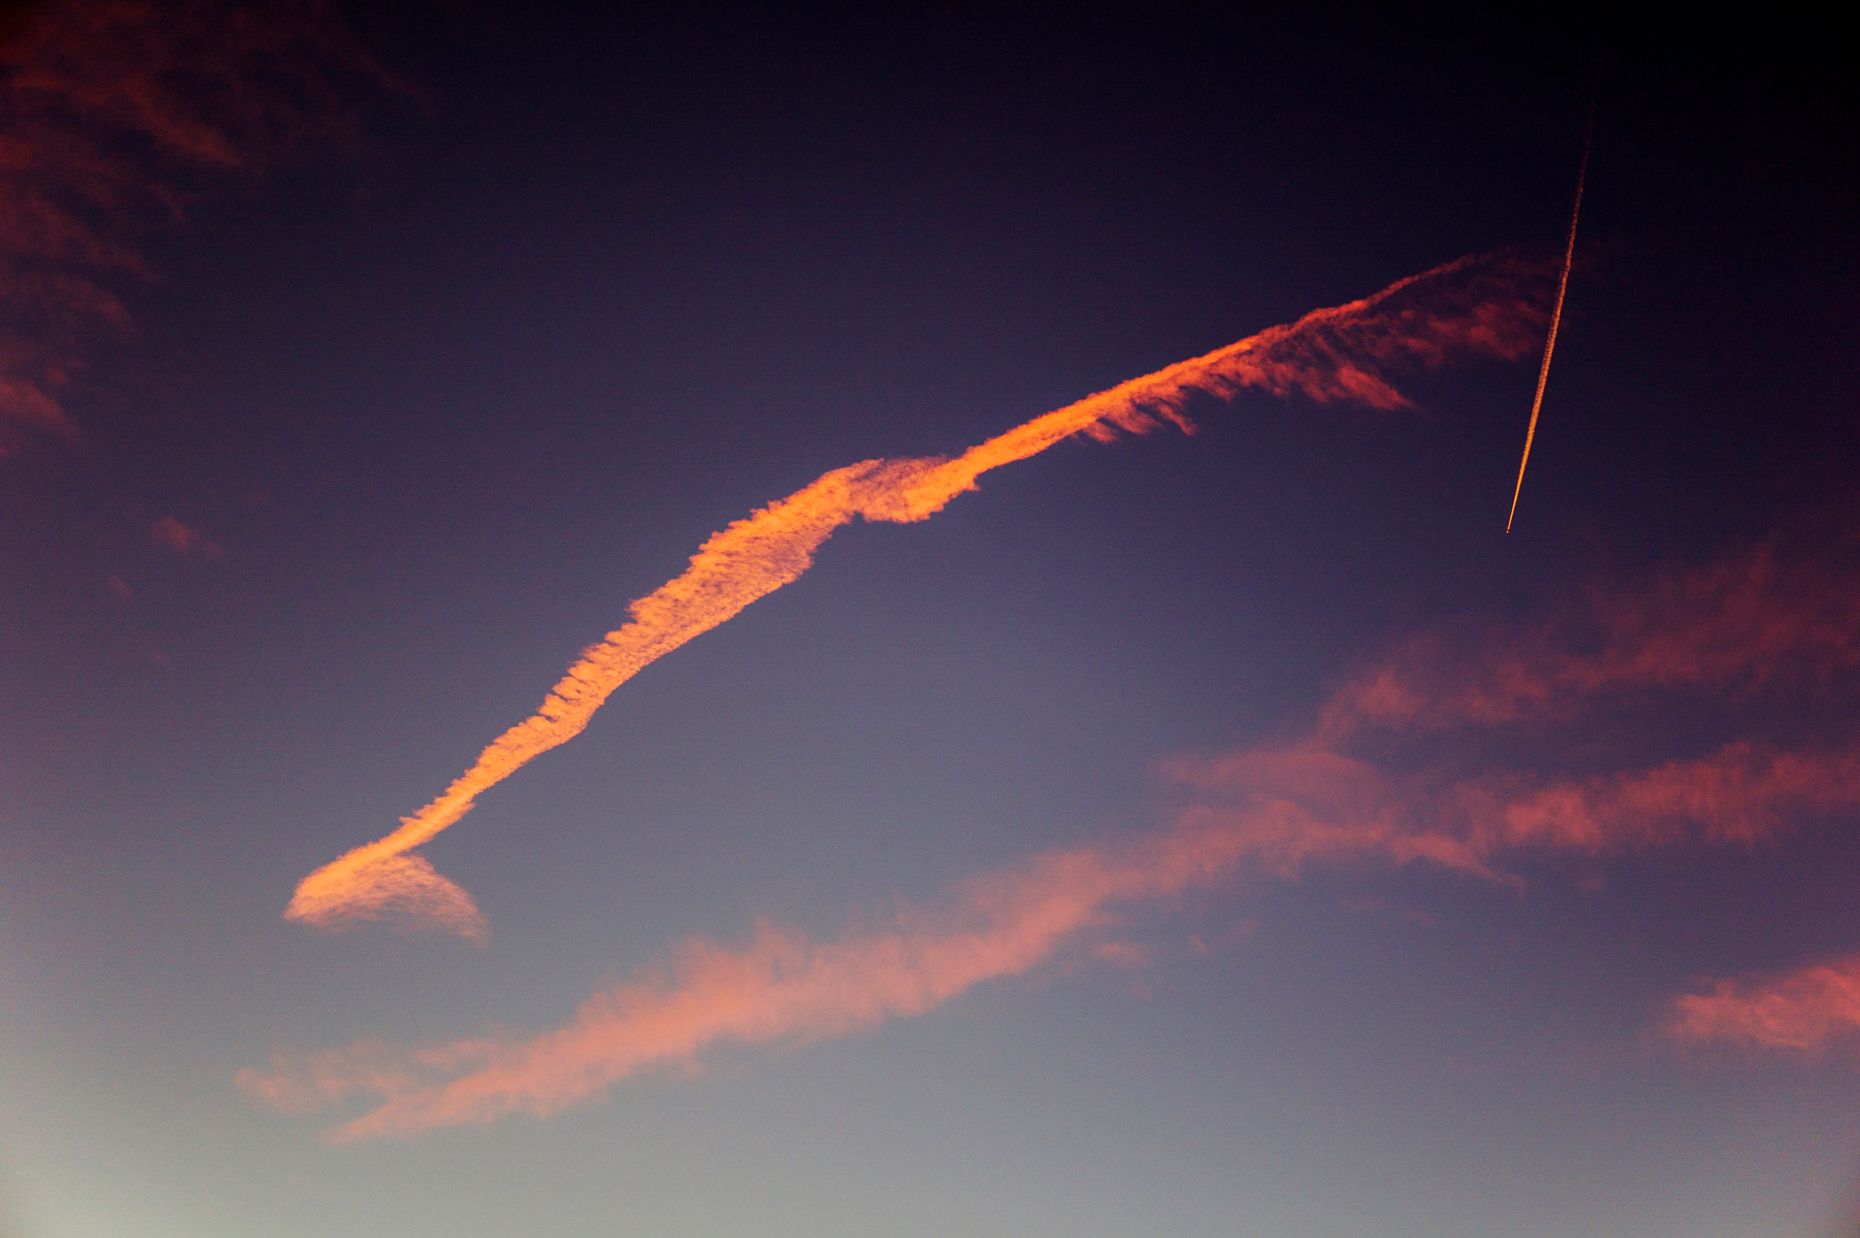 Jet contrails and pink clouds against blue sunset sky in Colorado, USA